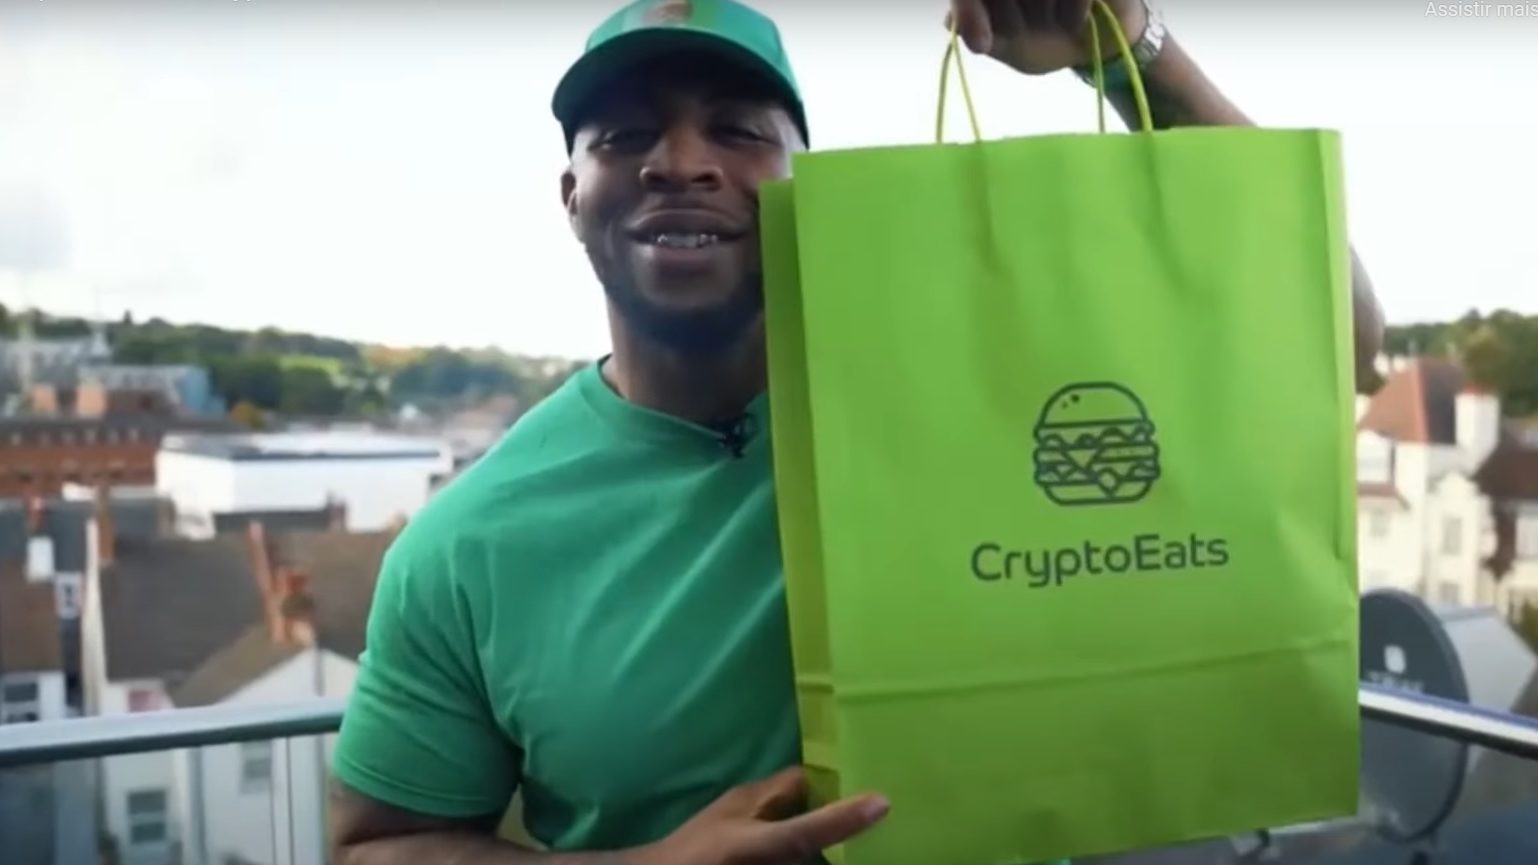 Bouncer Influencer in CryptoEats Outreach Video (Image: Playback/ YouTube)